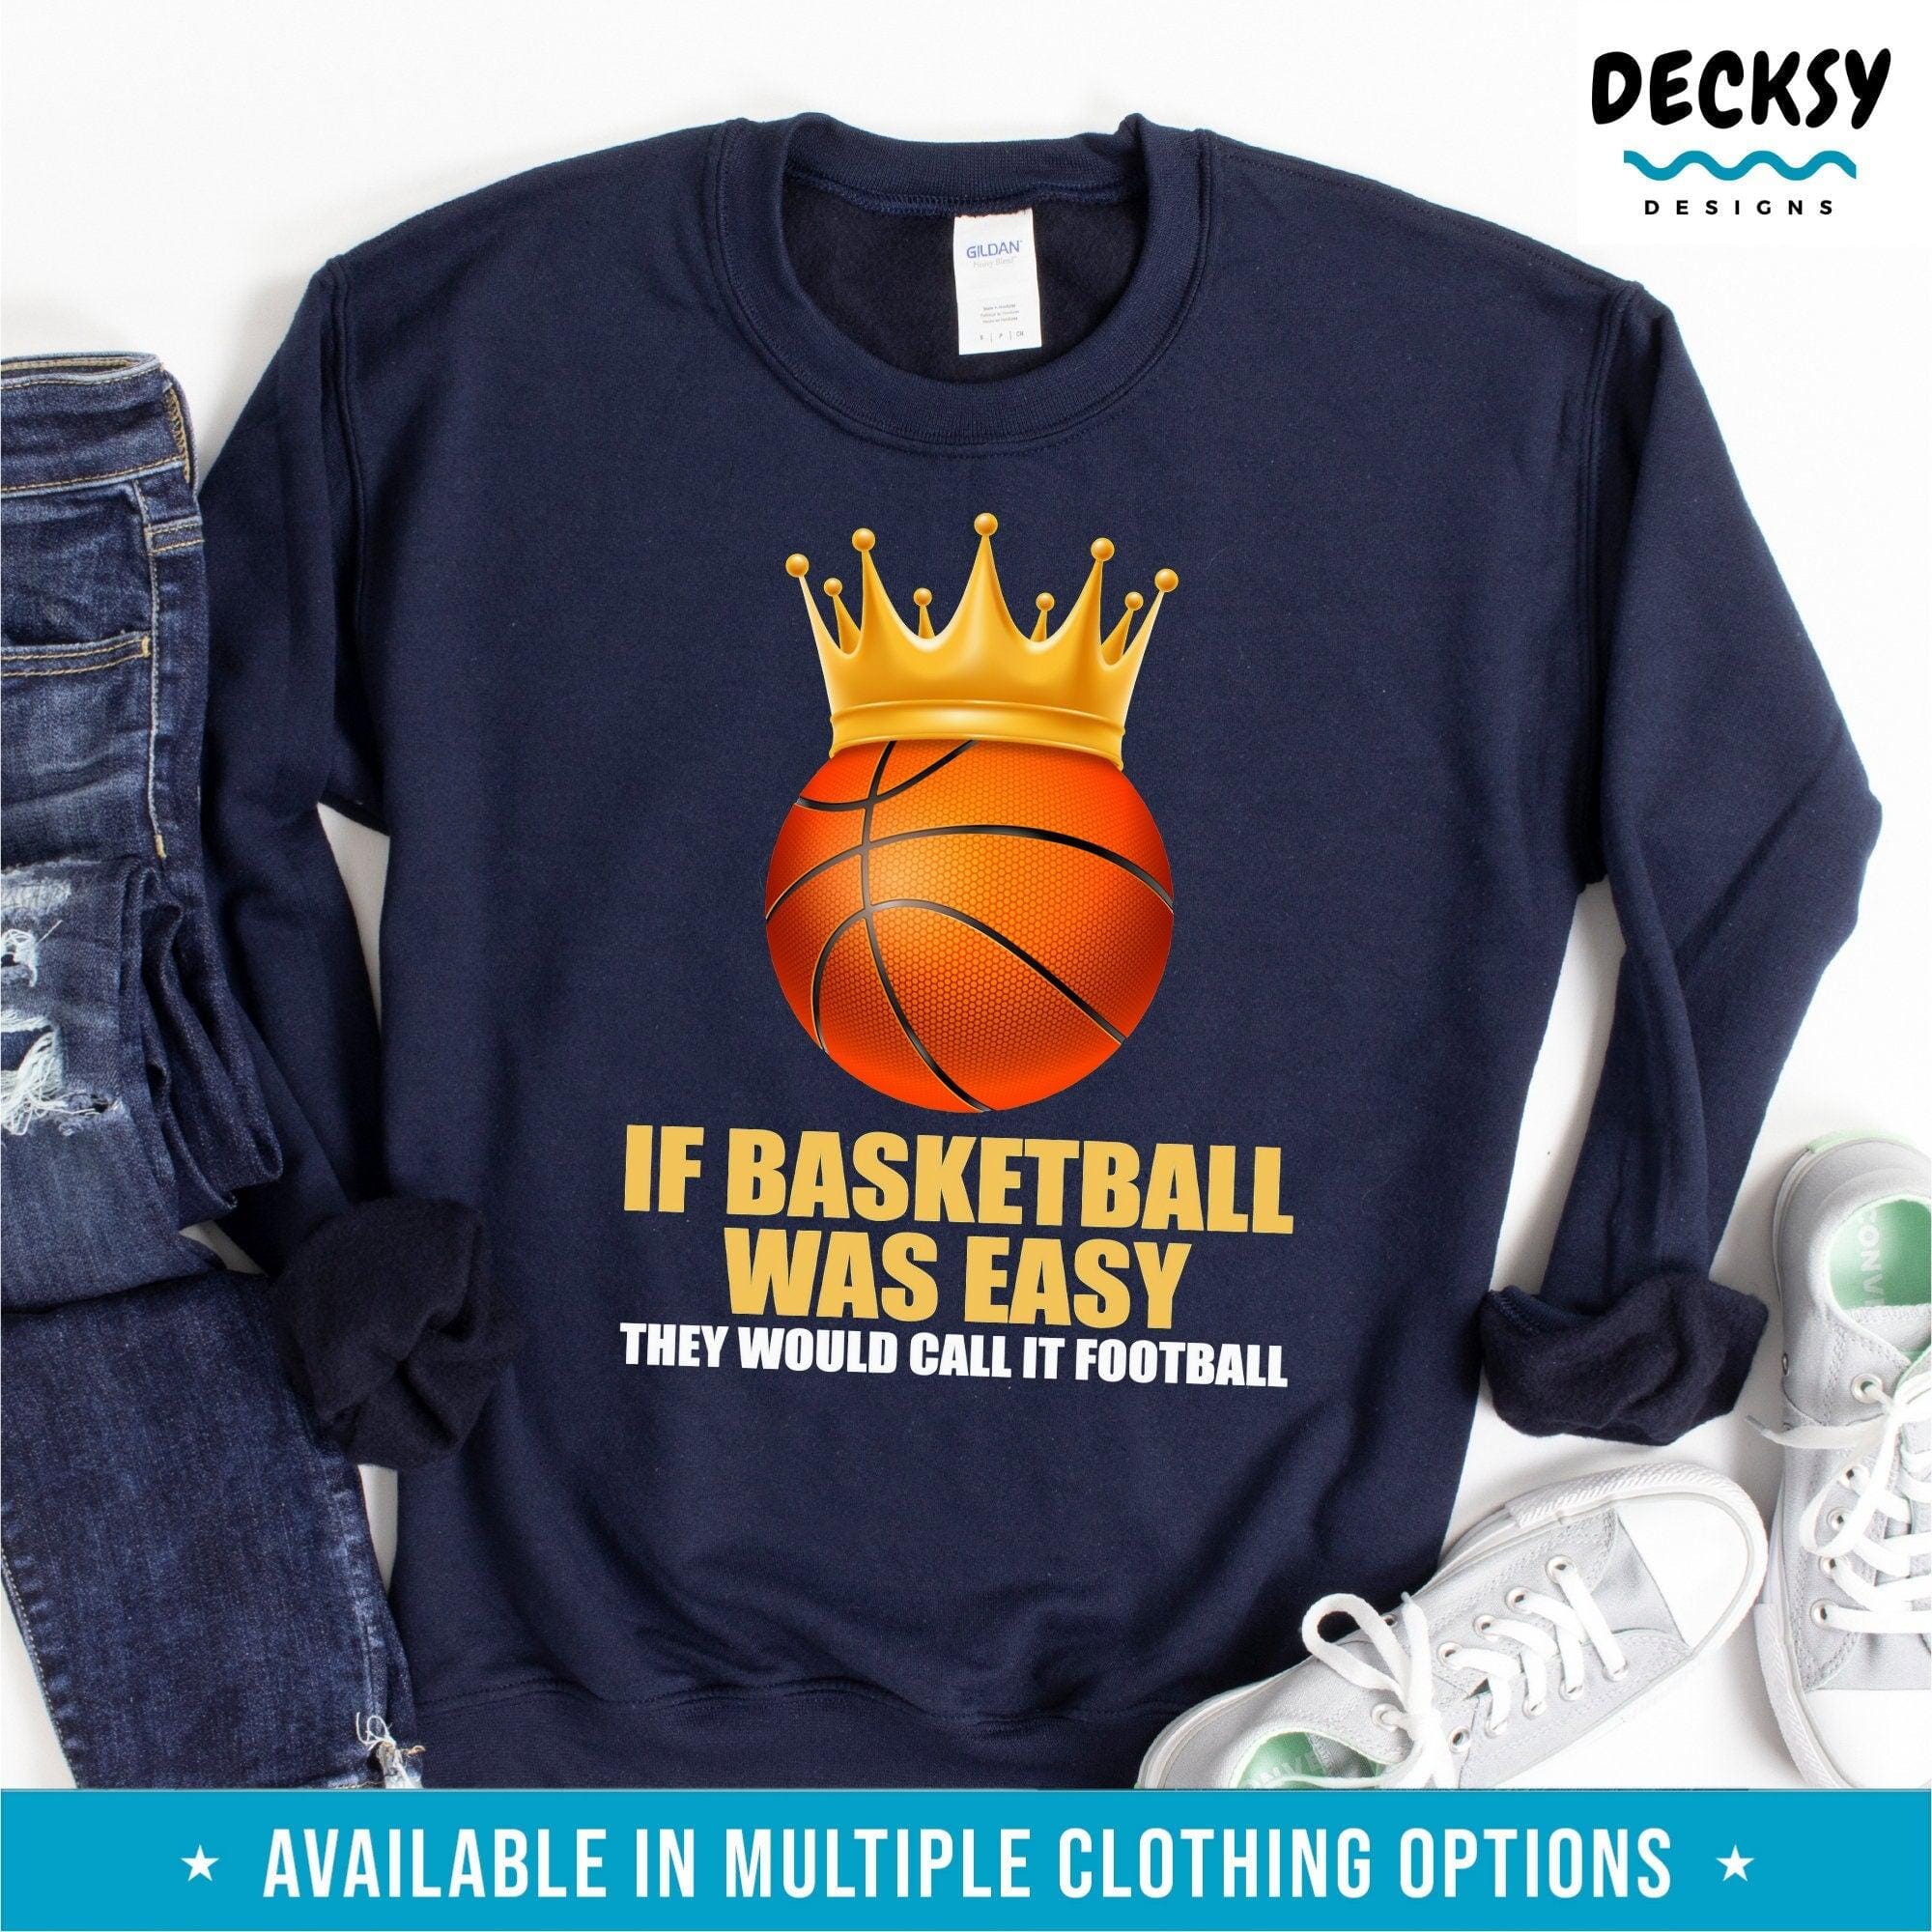 Funny Basketball Tshirt, Gift for Basketball Player-Clothing:Gender-Neutral Adult Clothing:Tops & Tees:T-shirts:Graphic Tees-DecksyDesigns